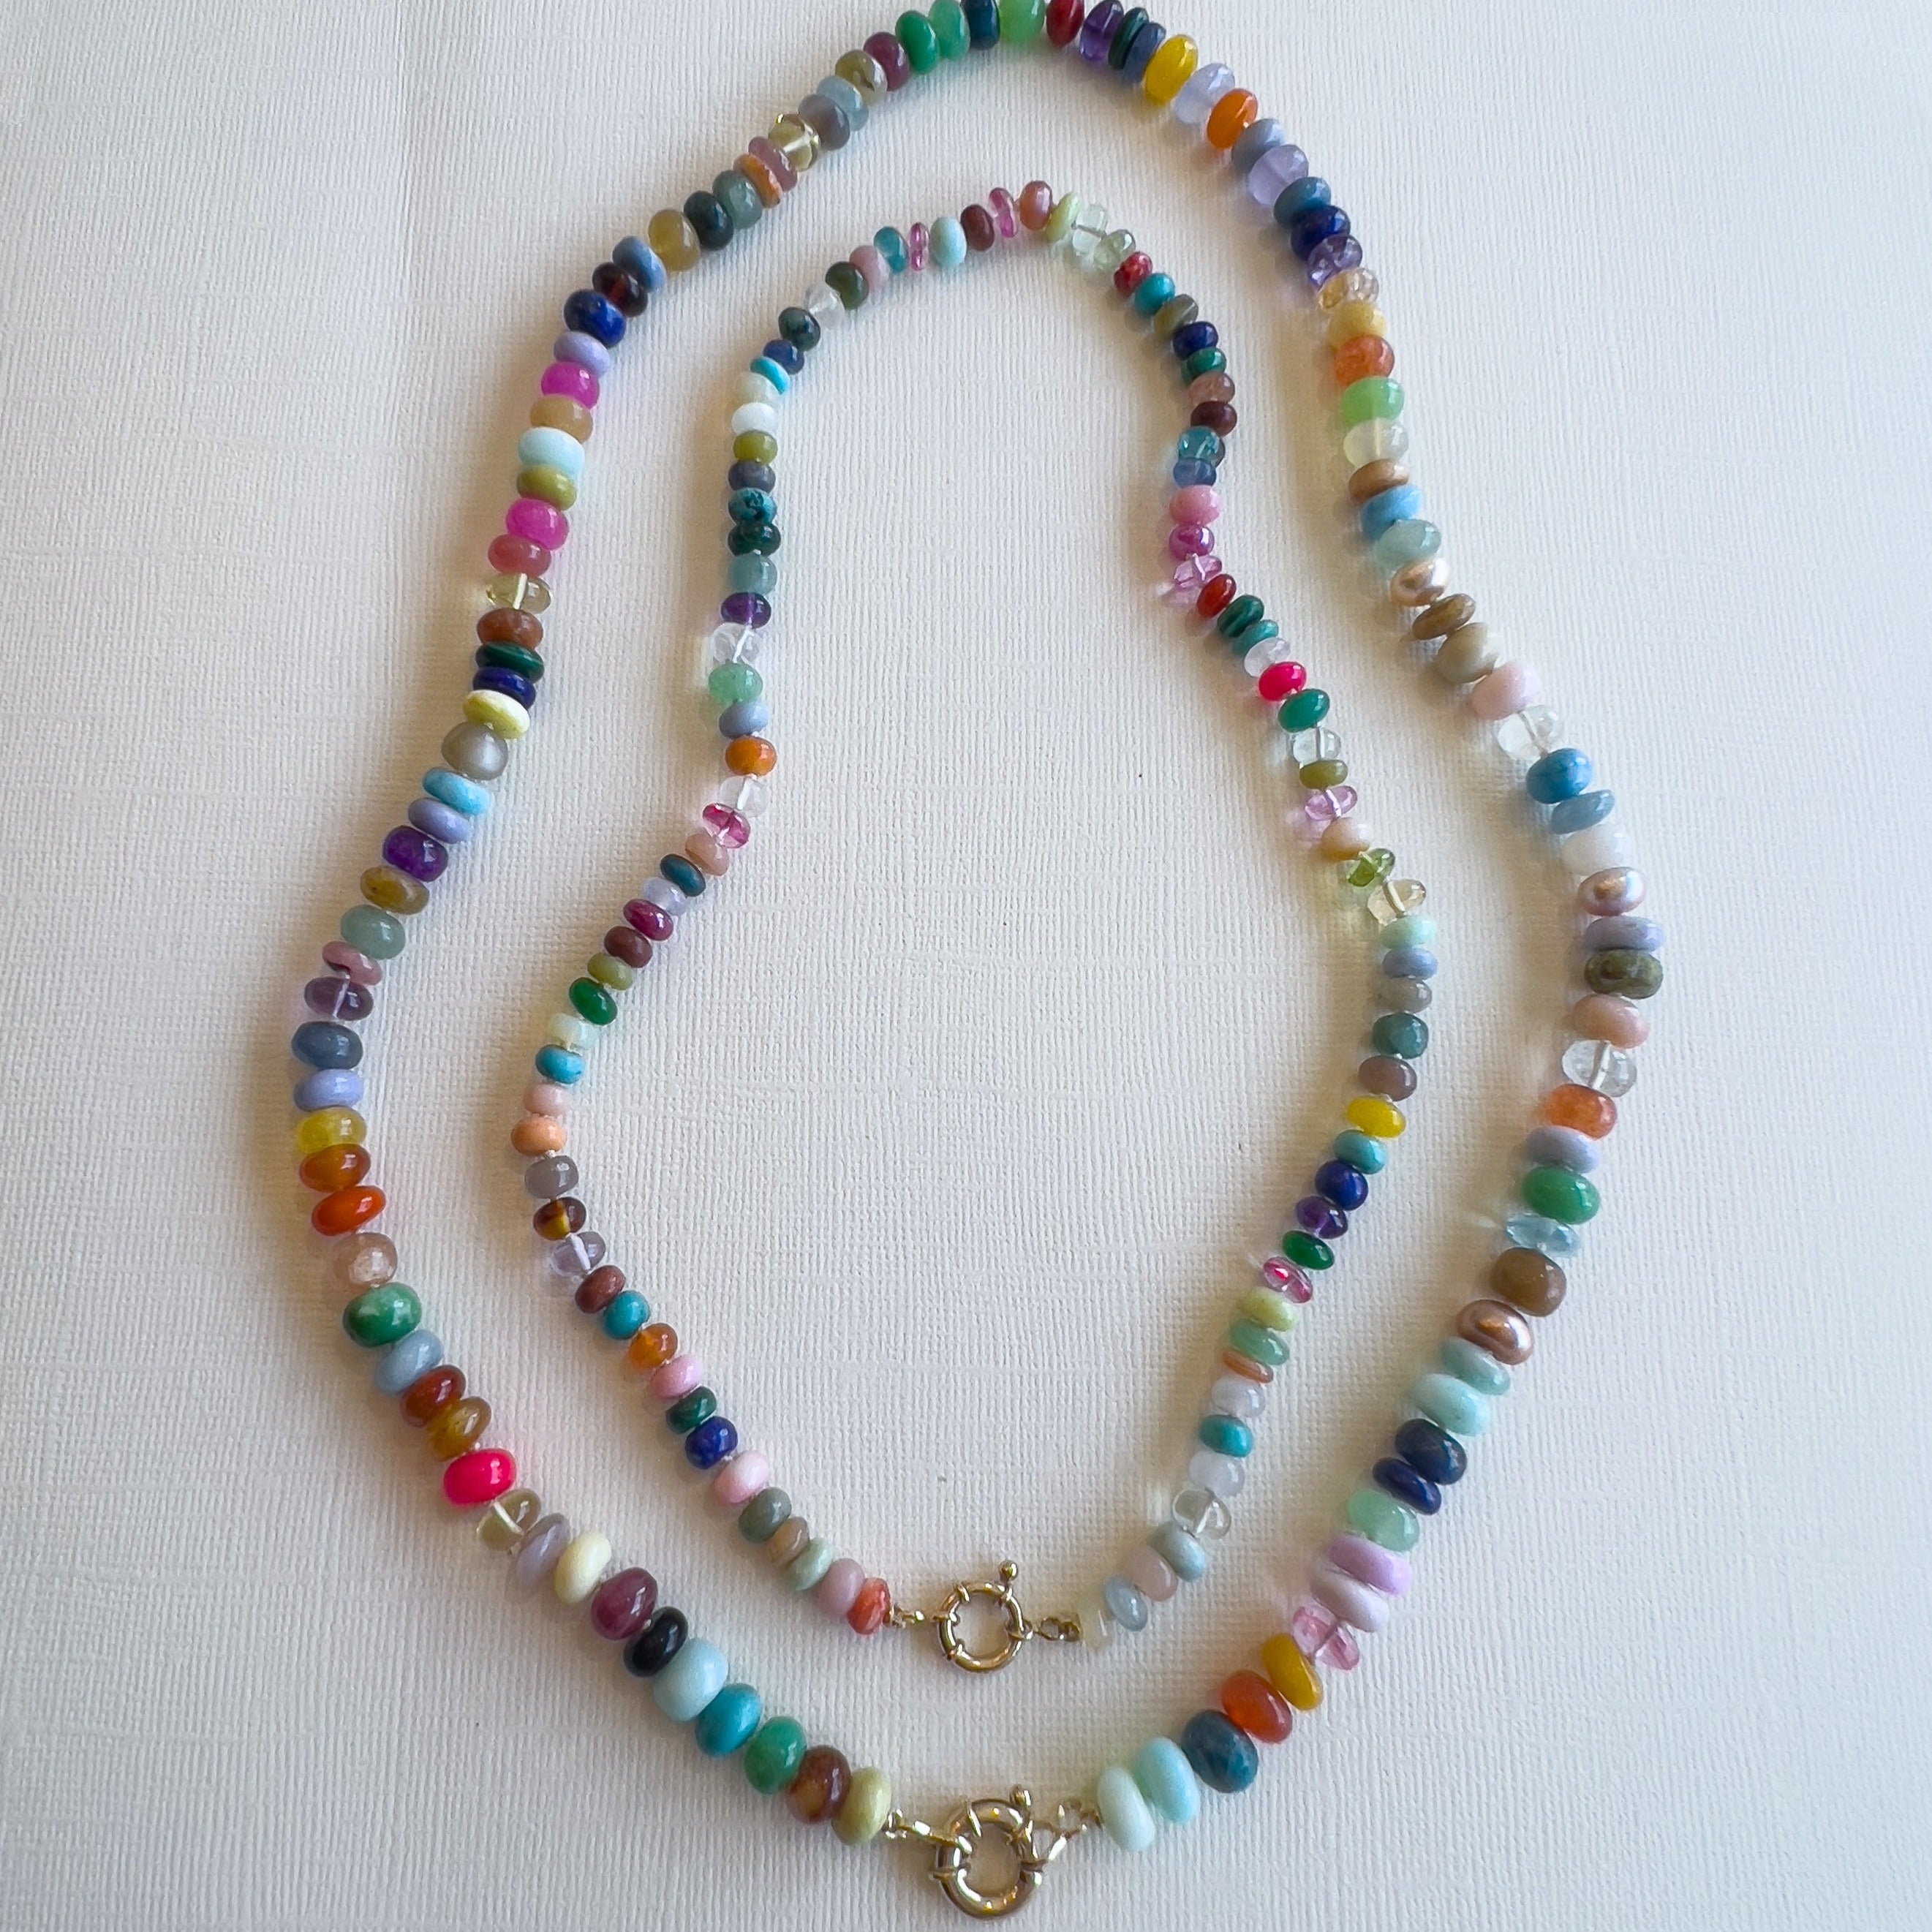 Small Magical Mixy Gemstone Necklace